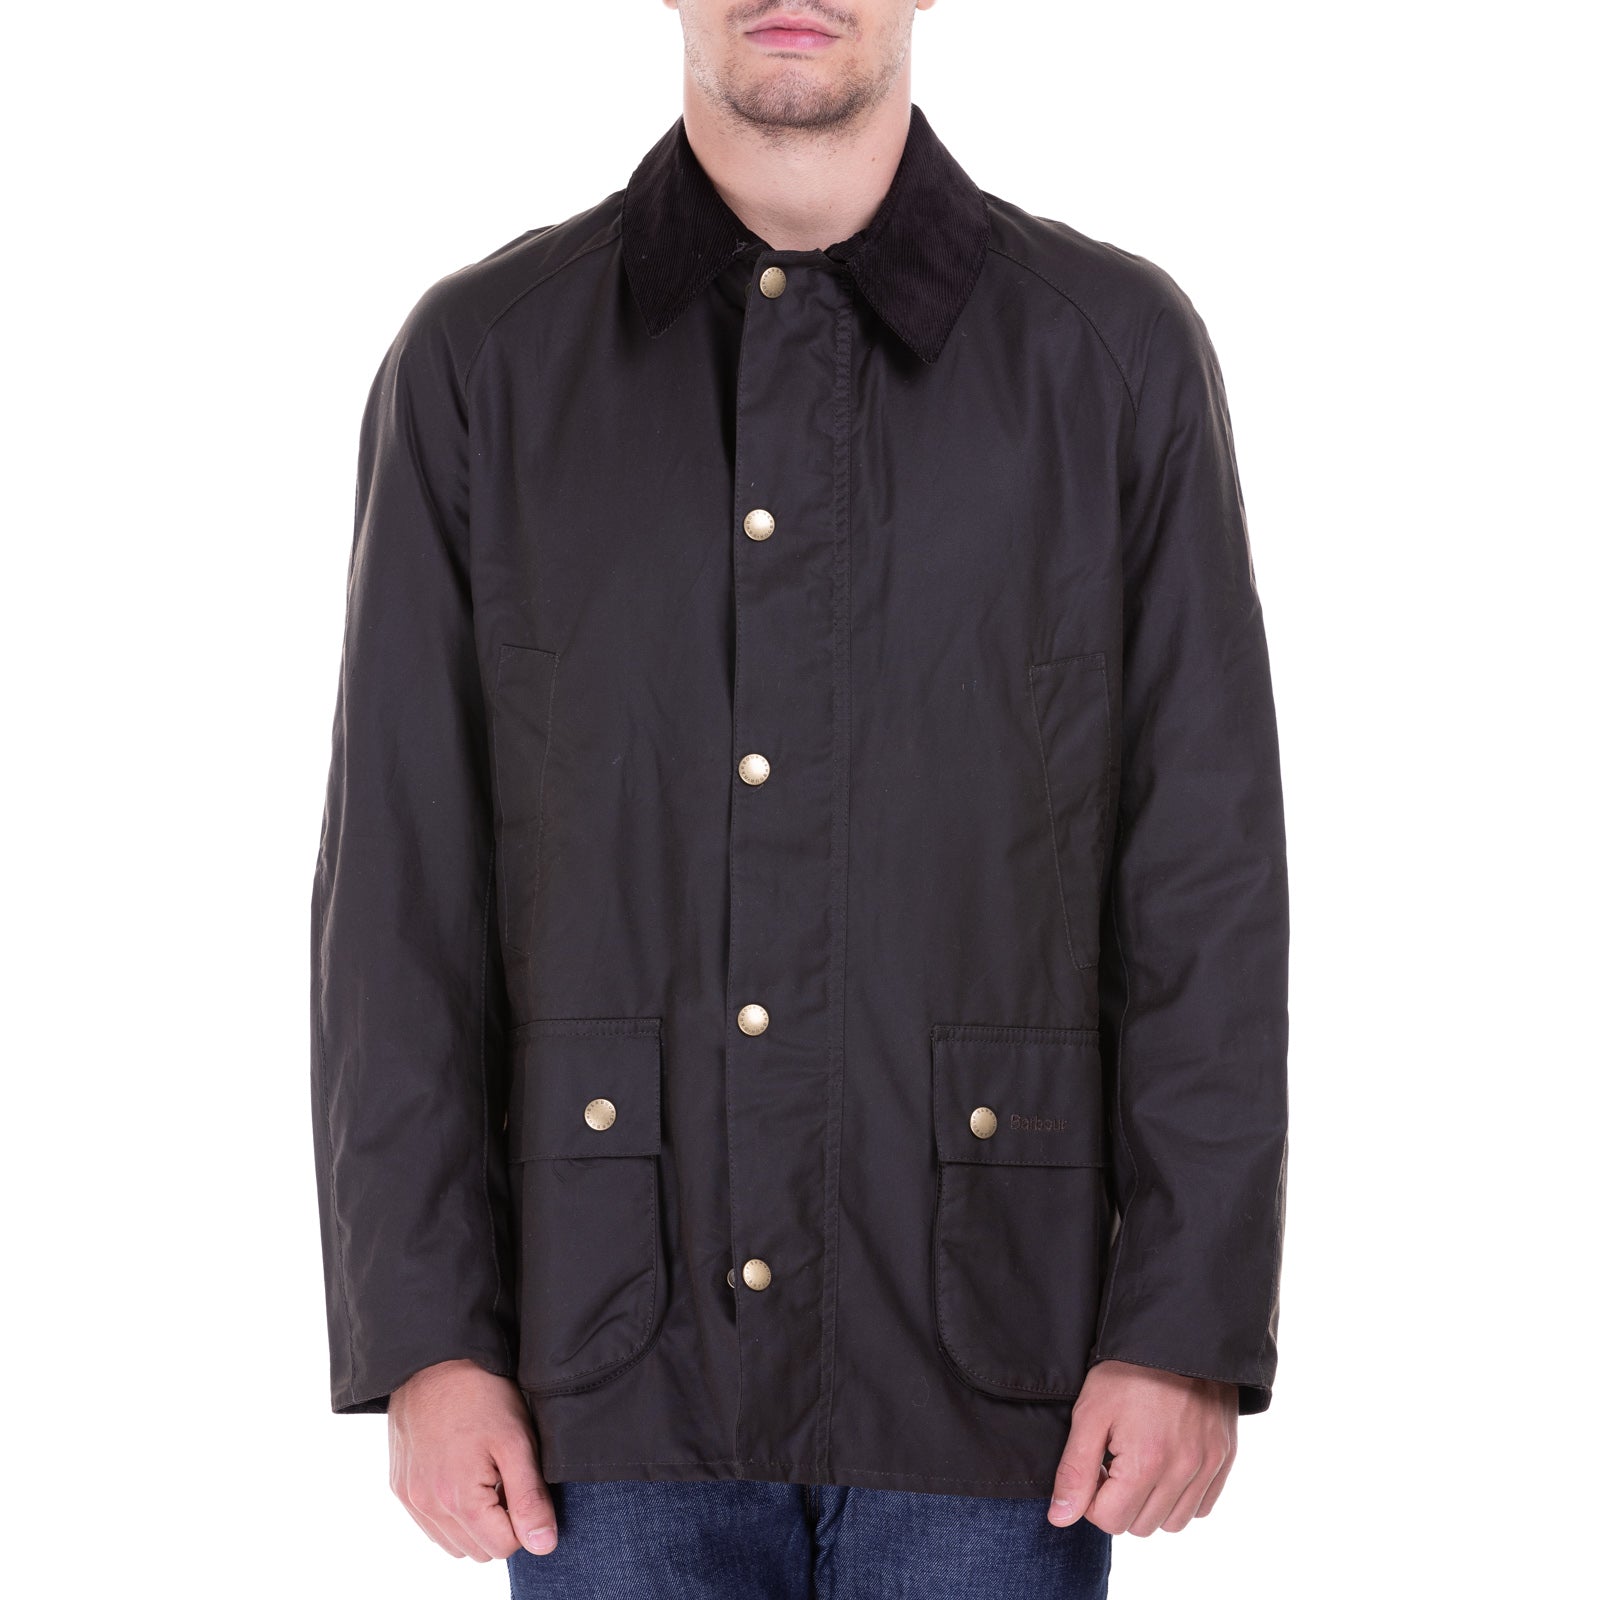 Giubbotto BARBOUR Ashby
Olive